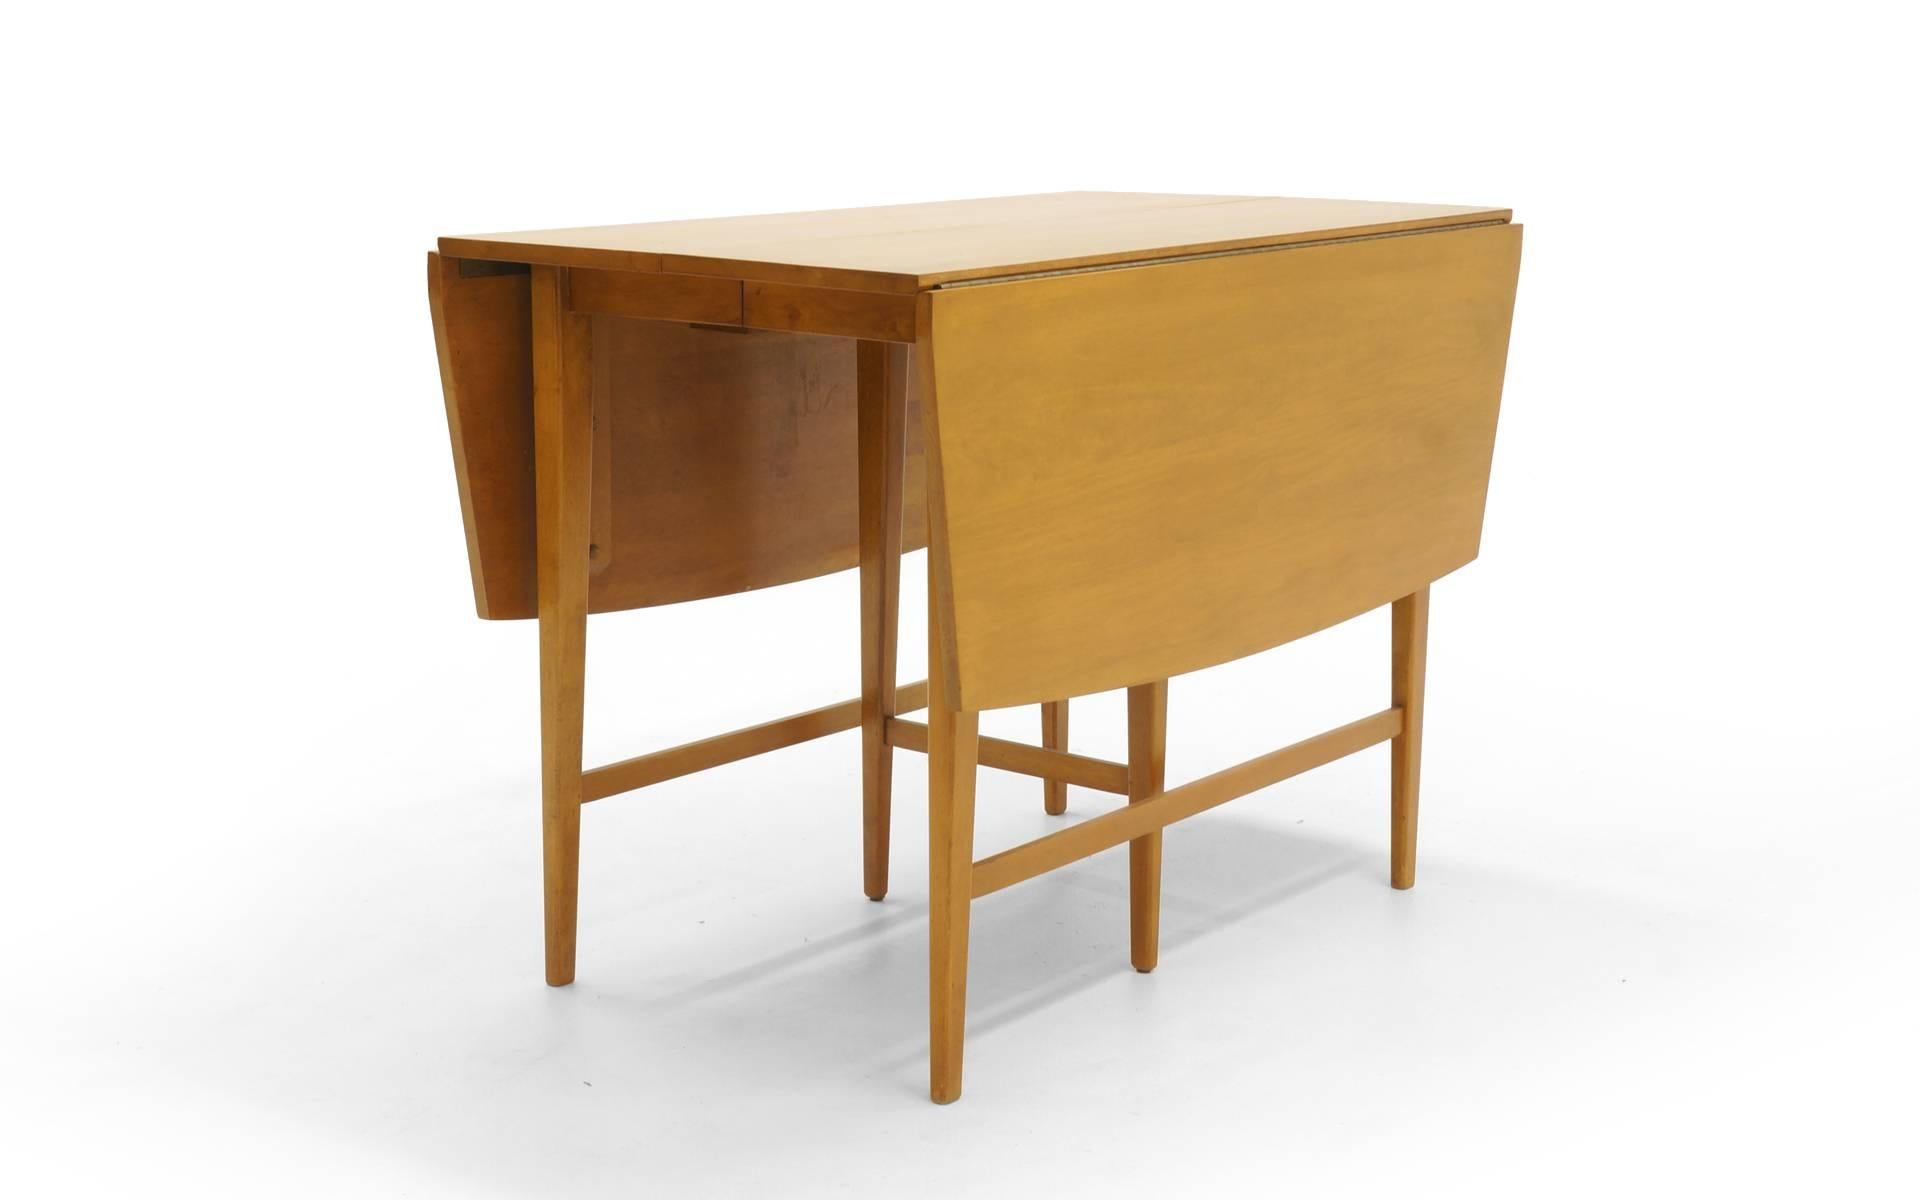 Mid-Century Modern Drop-Leaf Dining Table by Paul McCobb, Expandable with Three Leaves, Solid Maple